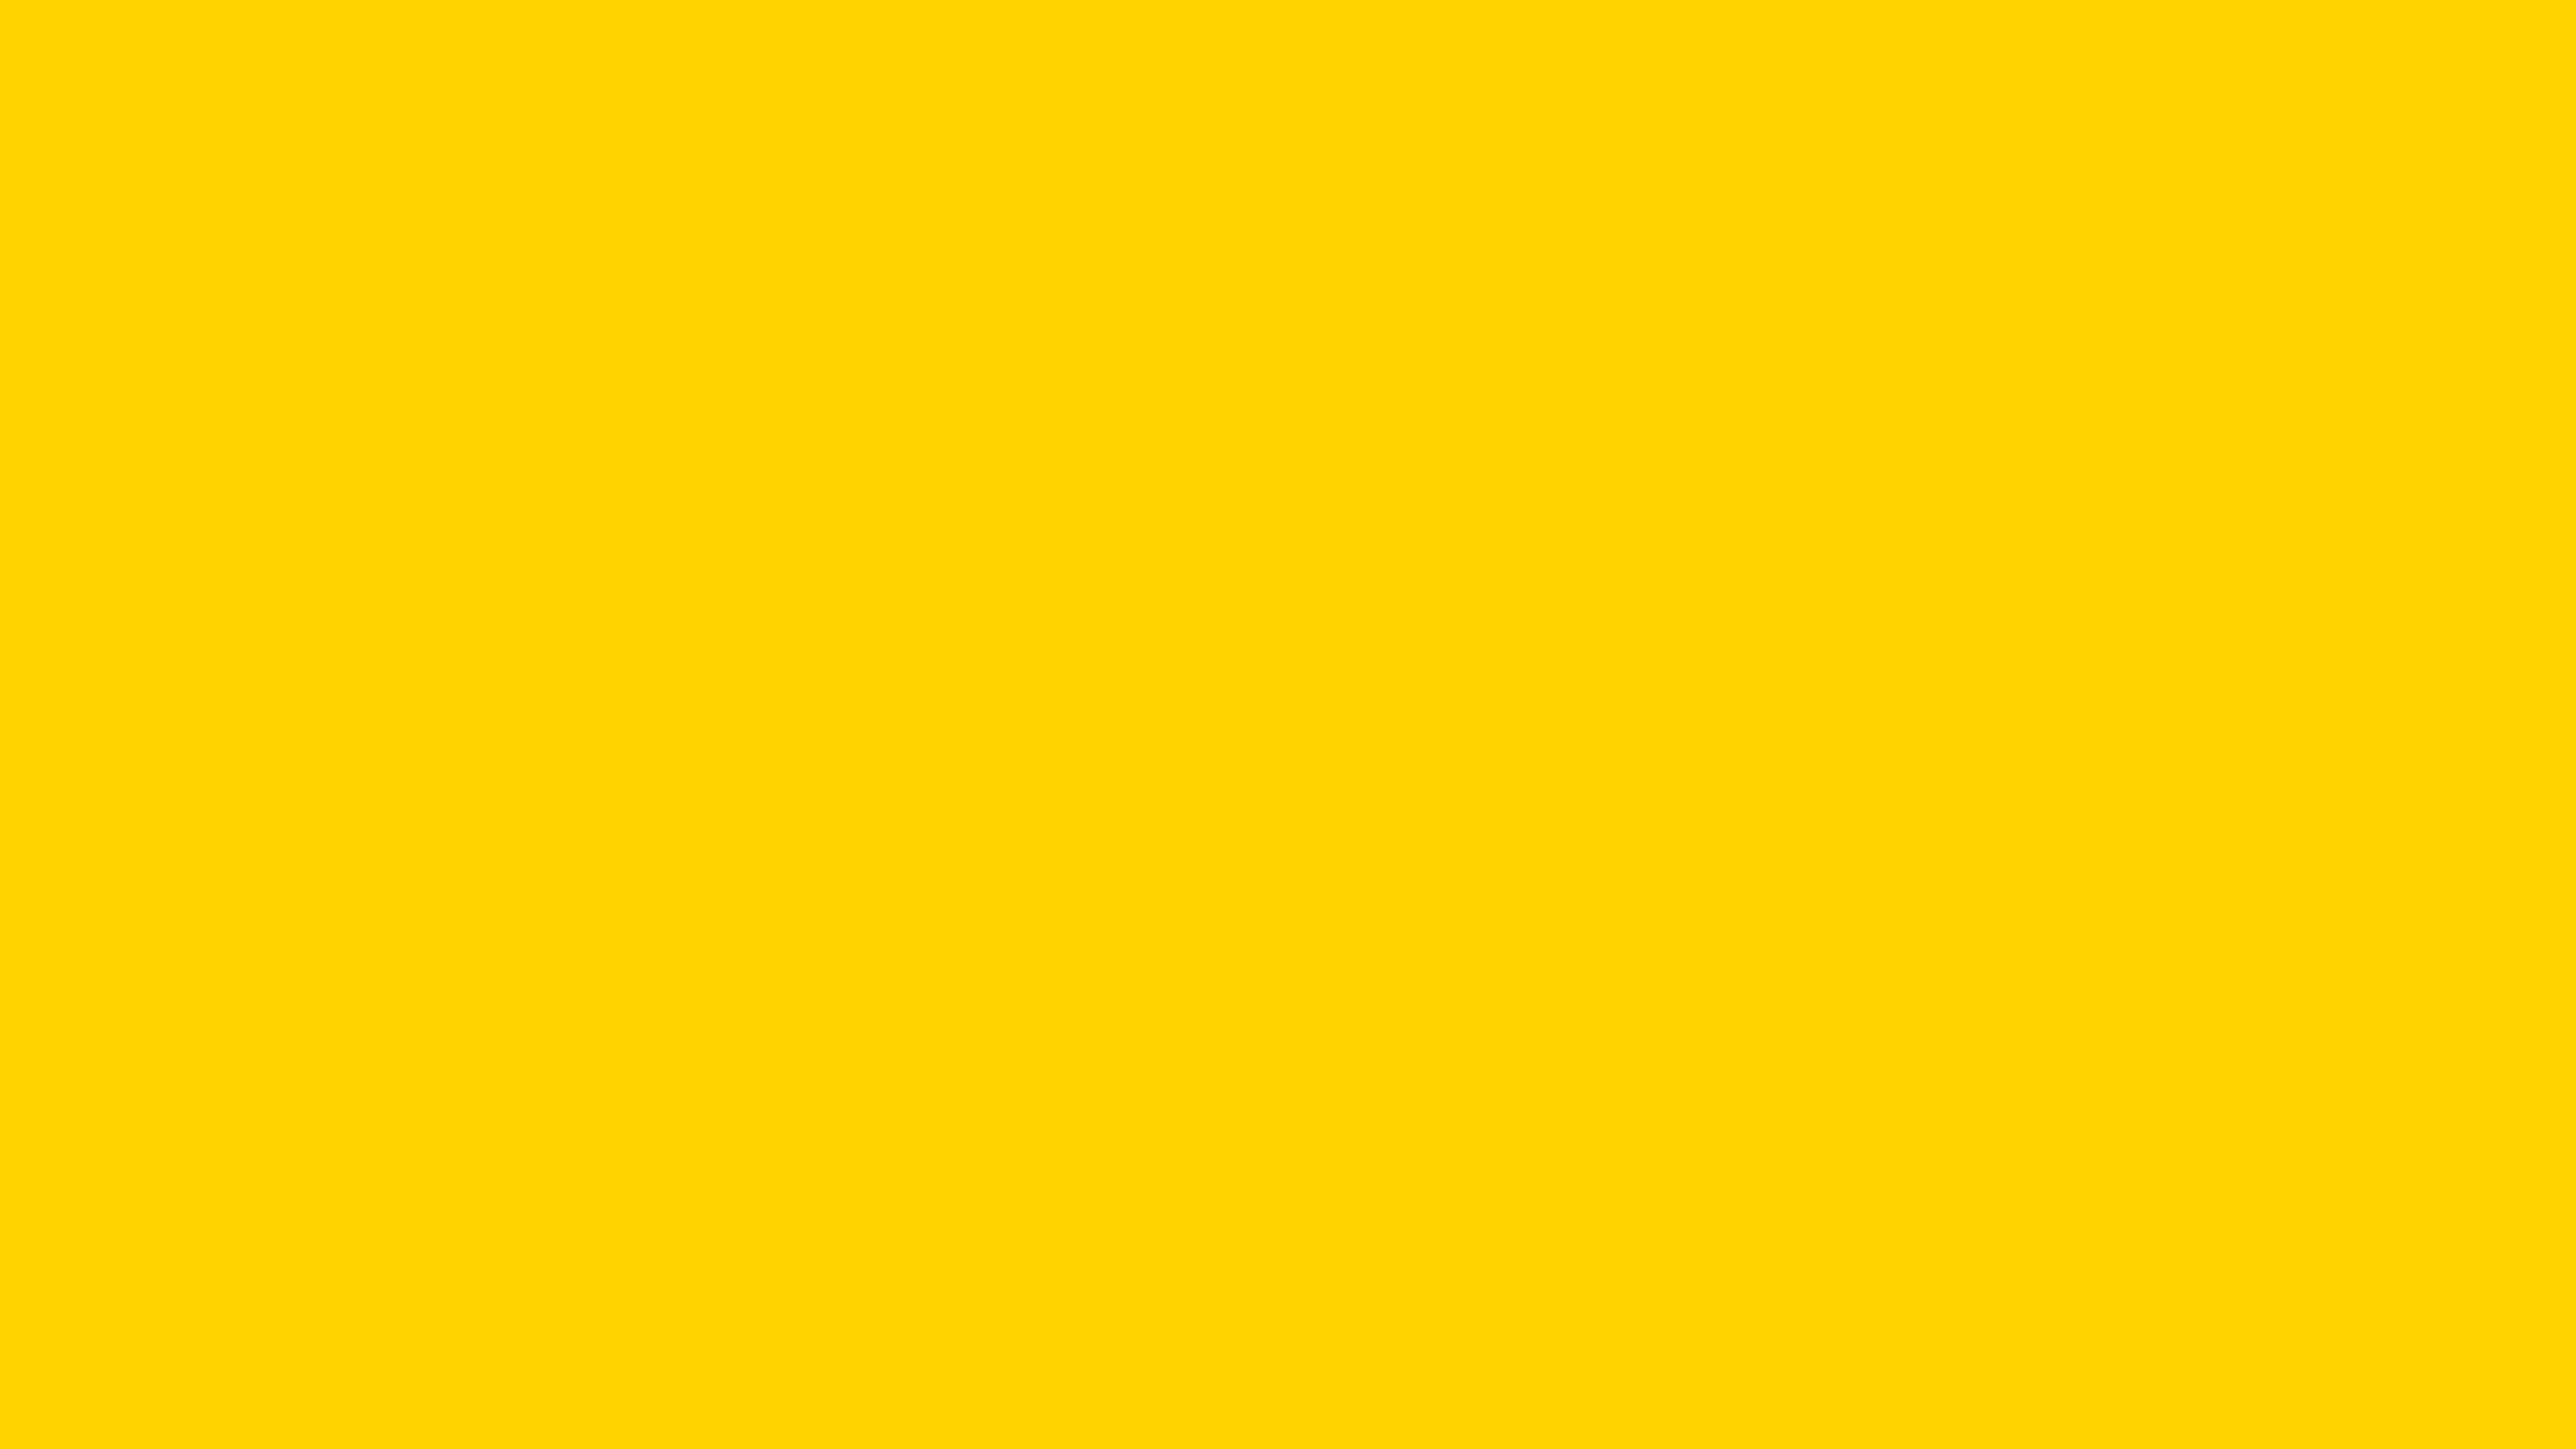 7680x4320 Cyber Yellow Solid Color Background